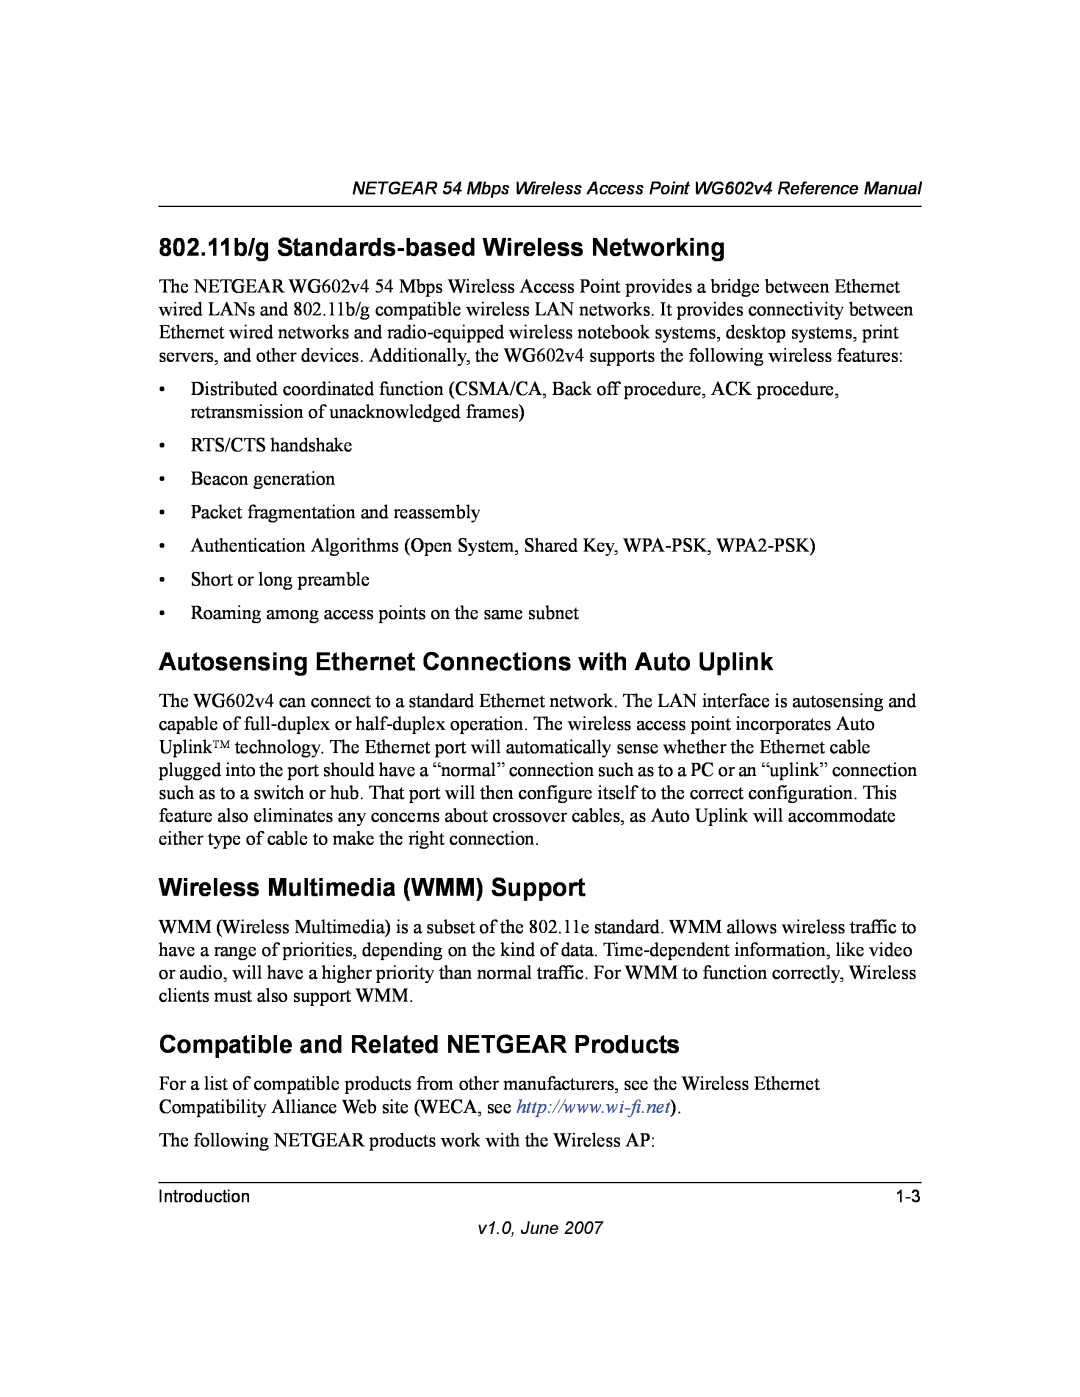 NETGEAR WG602V4 manual 802.11b/g Standards-based Wireless Networking, Autosensing Ethernet Connections with Auto Uplink 